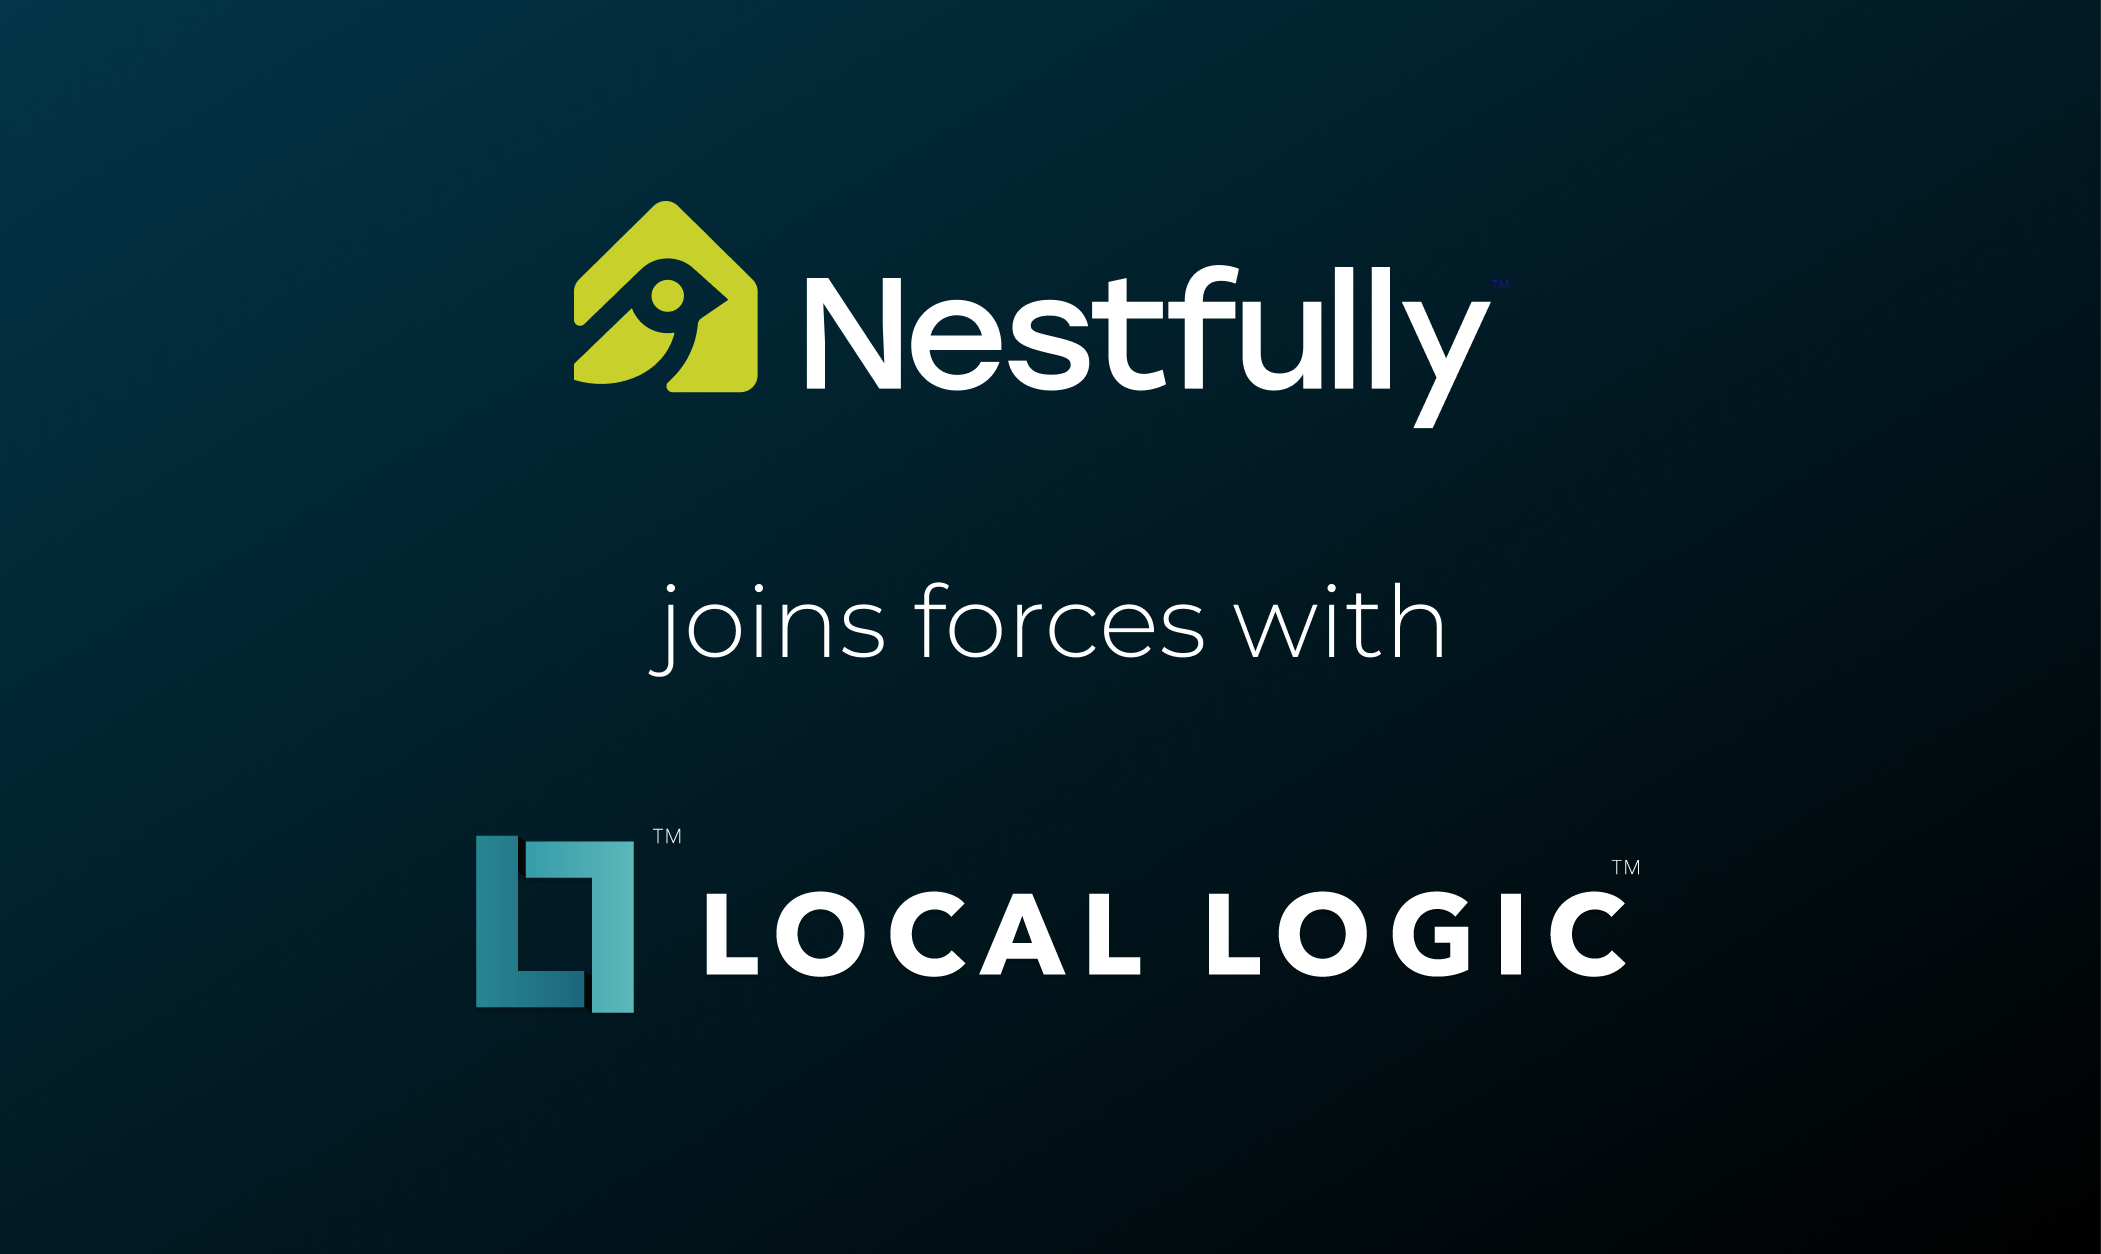 nestfully logo with local logic logo to announce strategic collaboration over a navy background